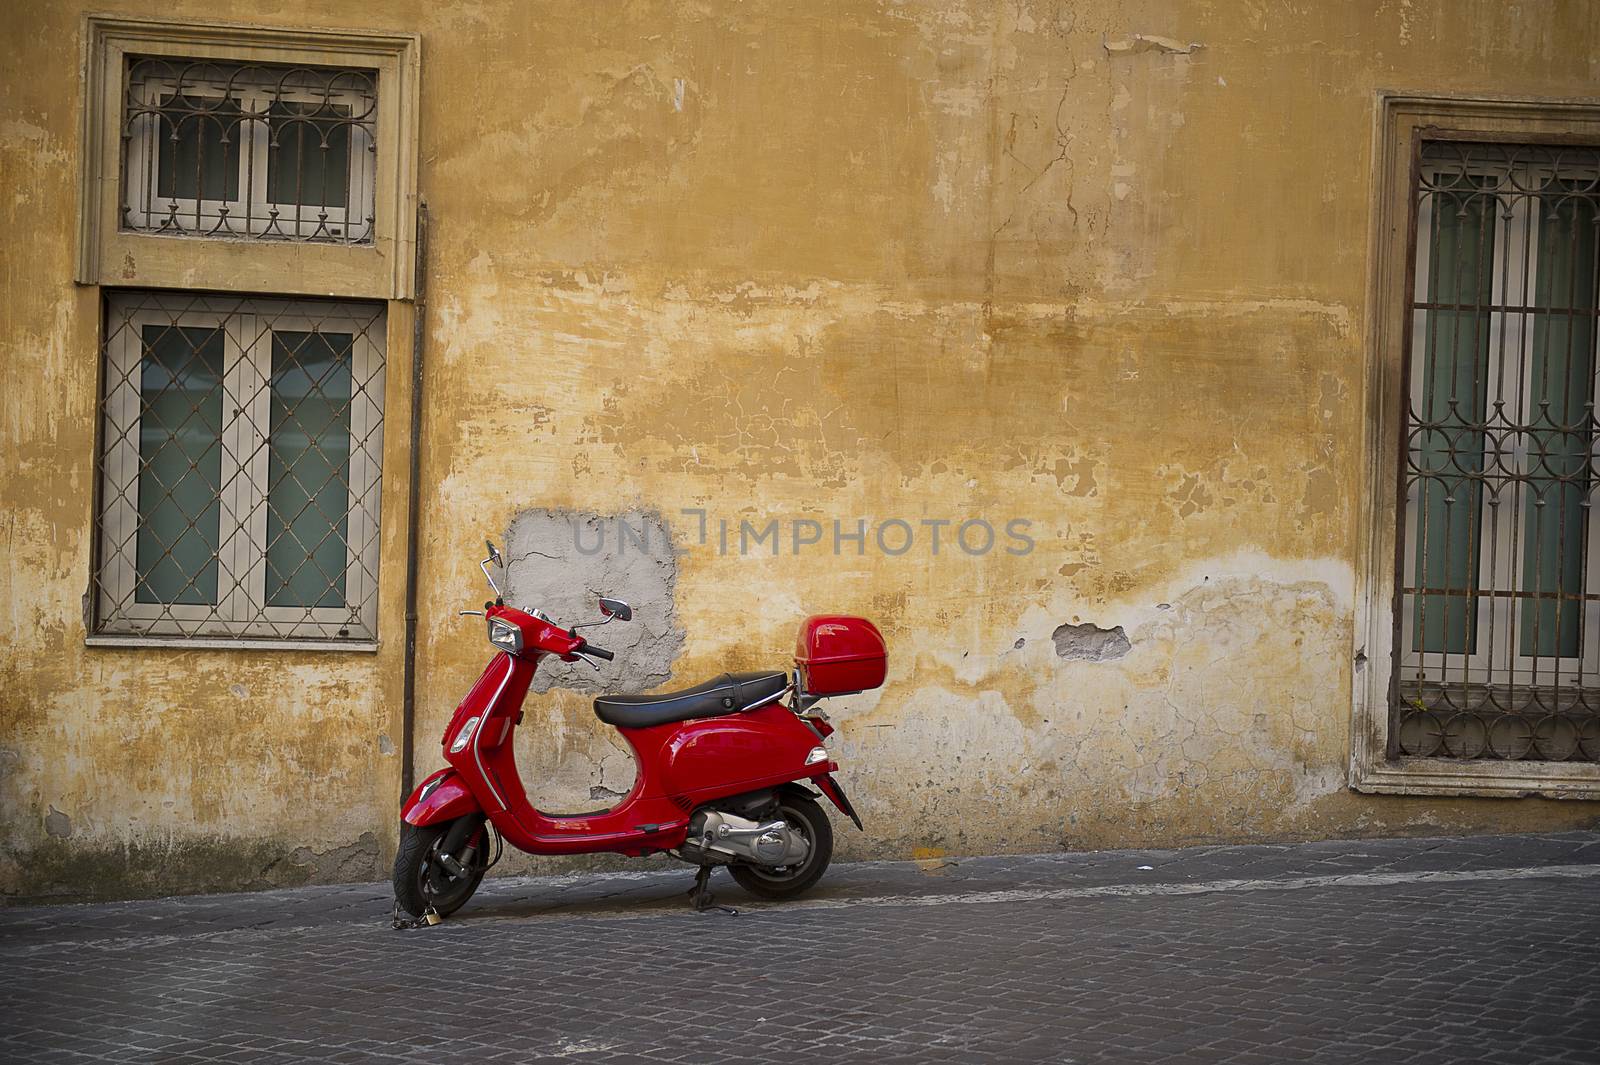 Bright red Vespa scooter parked in an urban street in front of a grungy old townhouse with burglar bars on the windows and crumbling plaster on the walls